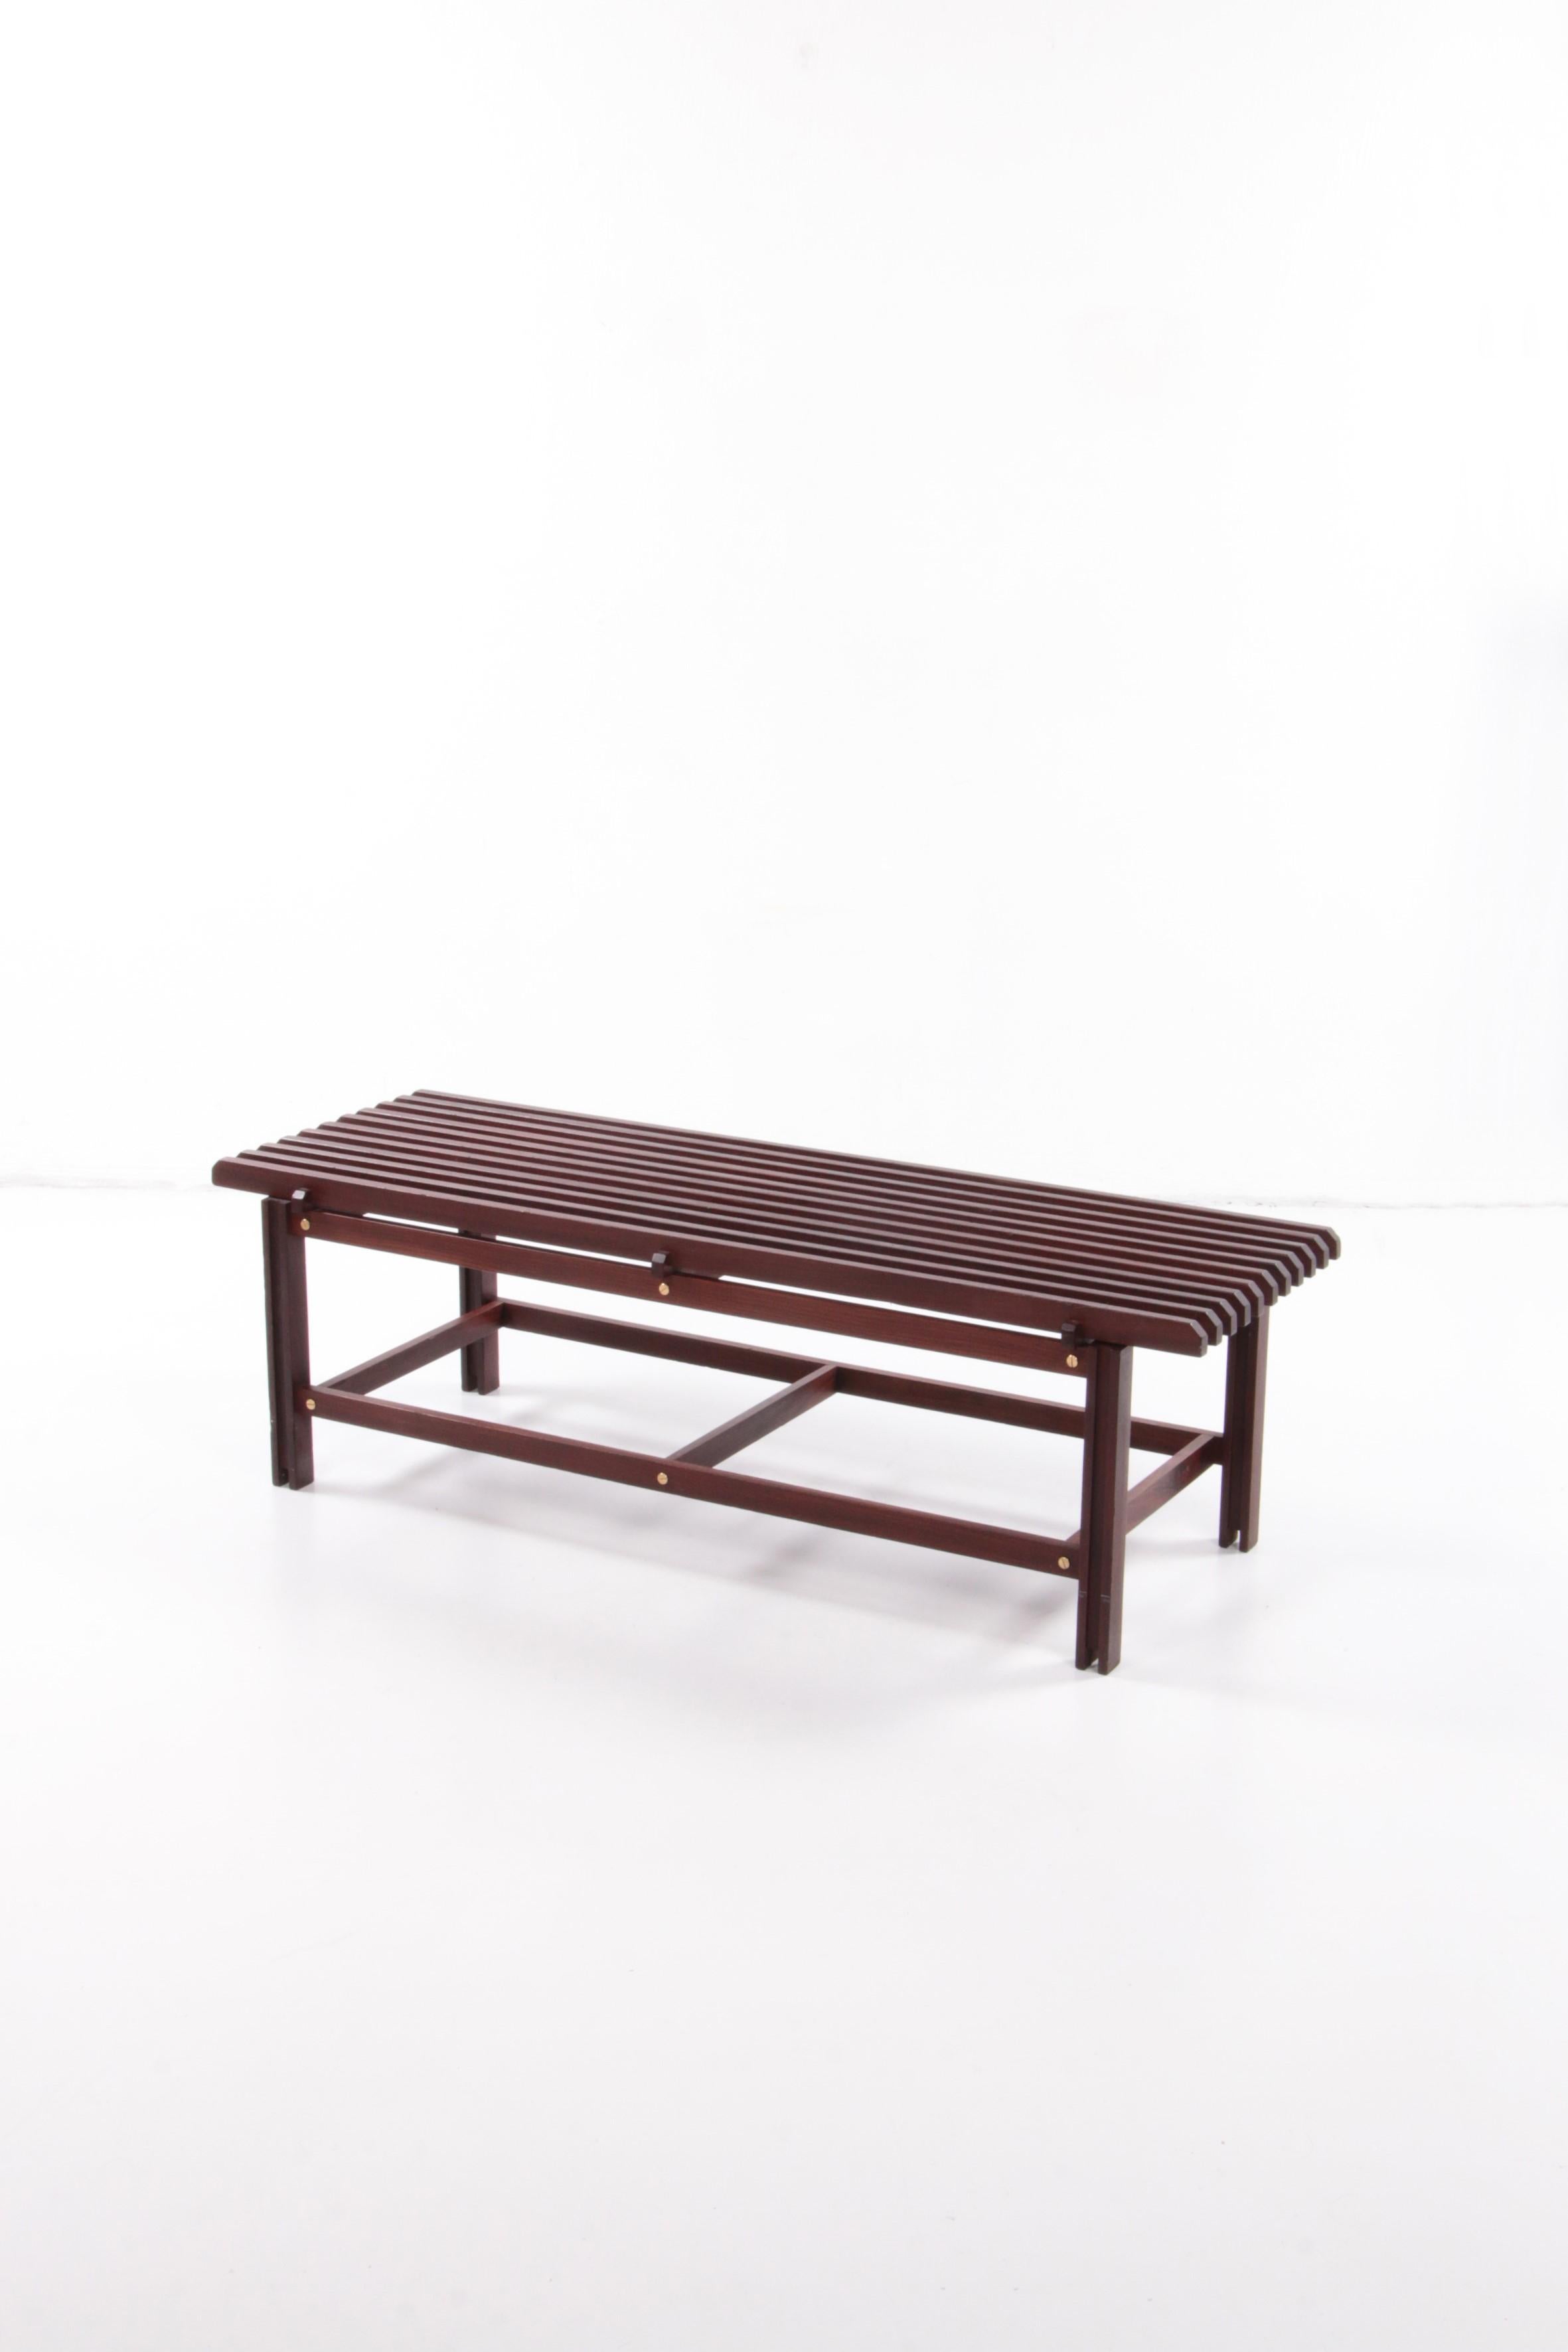 Discover the timeless beauty of the Ico & Luisa Parisi wooden bench, a 1960 masterpiece made in Italy. This elegant piece of furniture embodies the modern Italian style of the 1950s and is a real eye-catcher in any interior. The bench is carefully